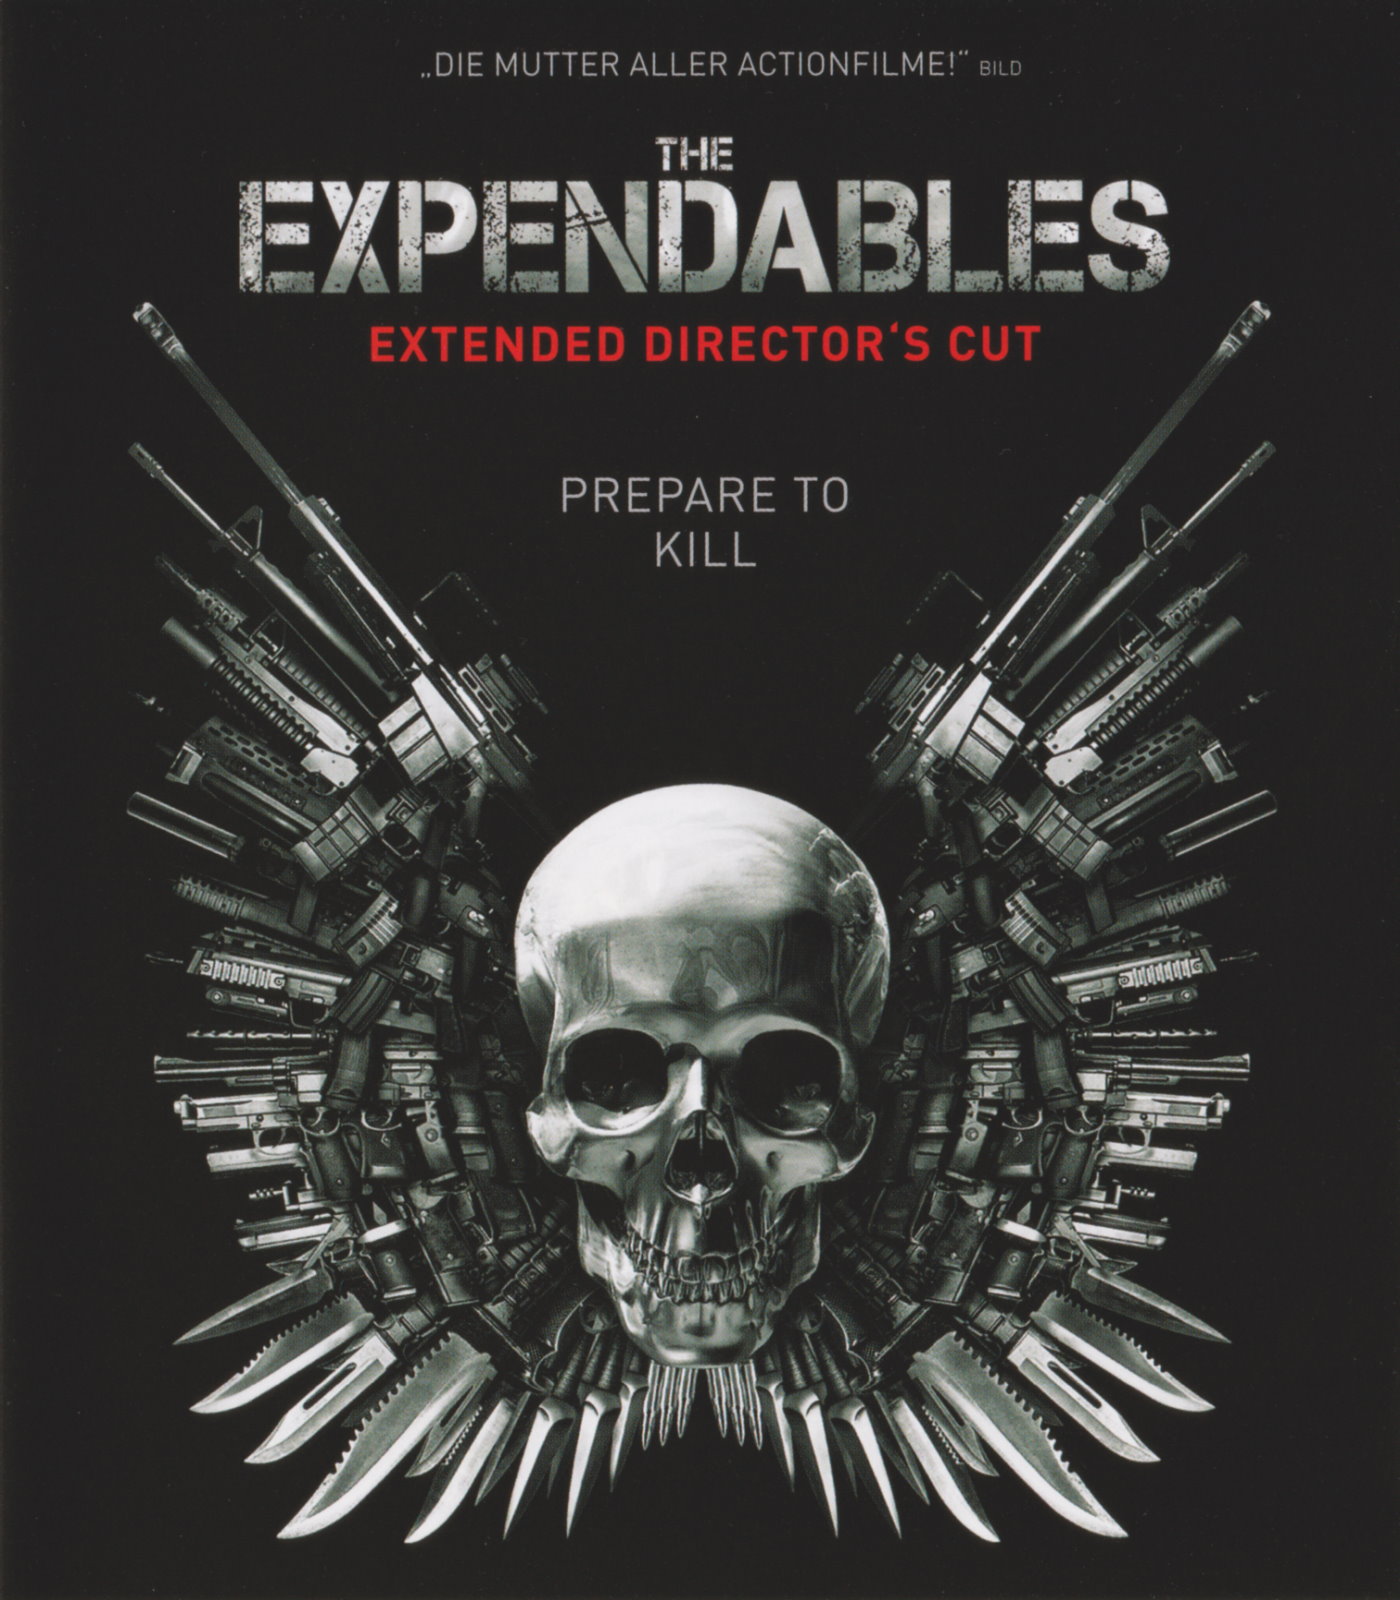 Cover - The Expendables.jpg